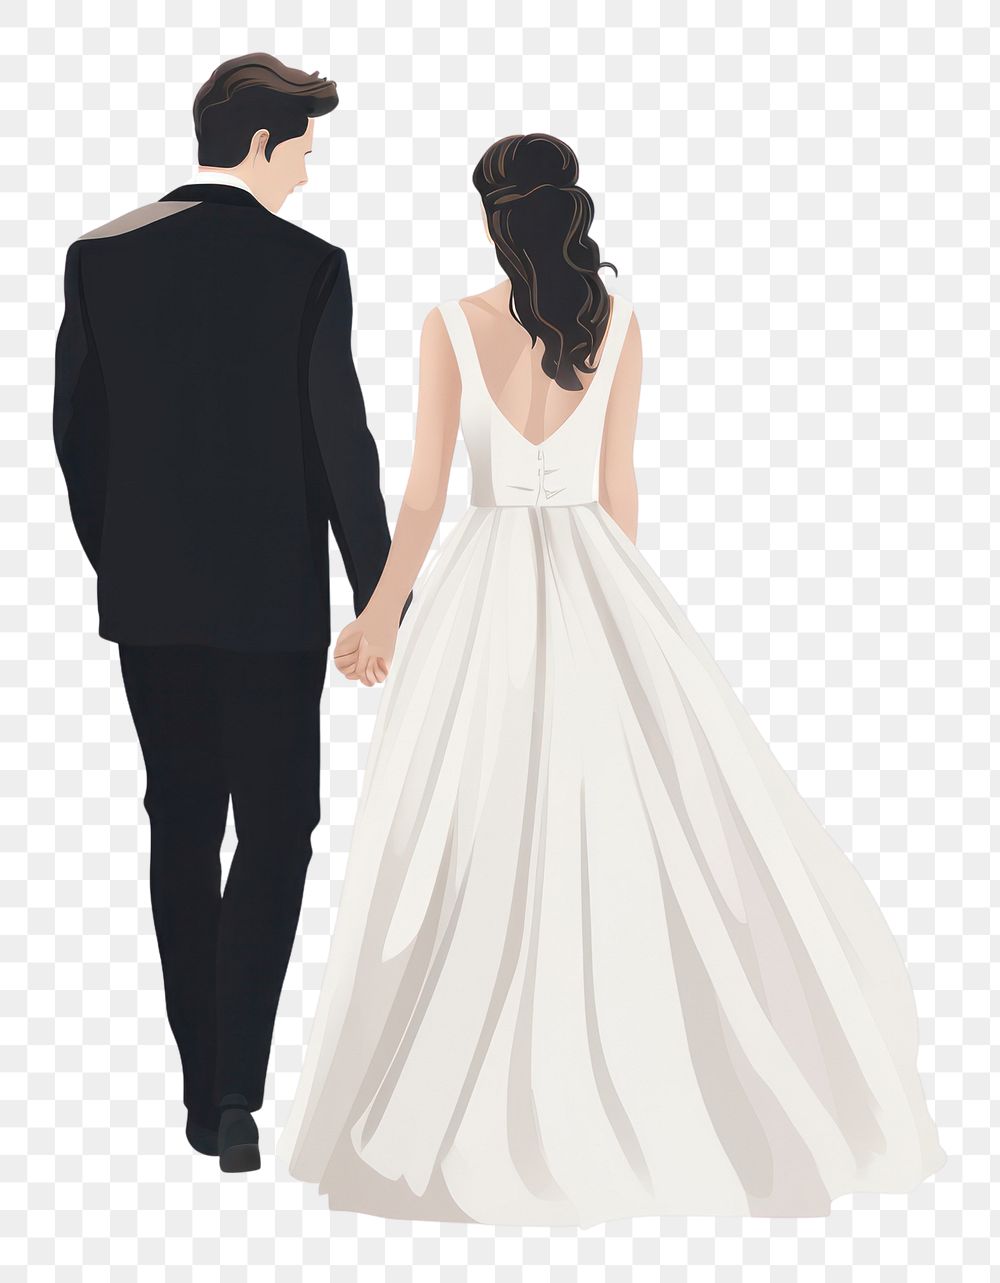 A groom and bride holding hands wedding fashion dress